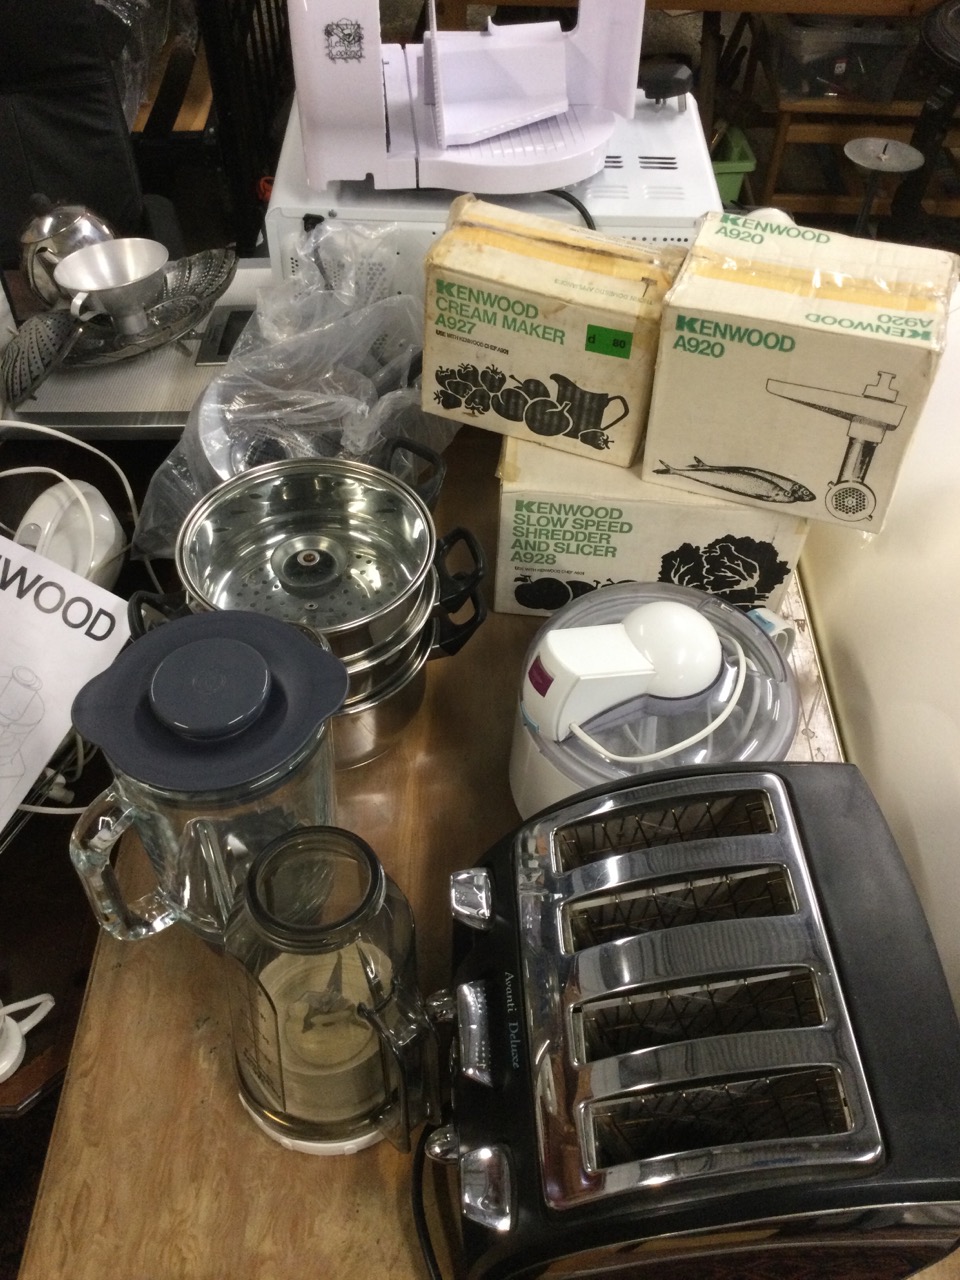 Miscellaneous electrical kitchen appliances including a Kenwood chef with attachments, a - Image 2 of 3